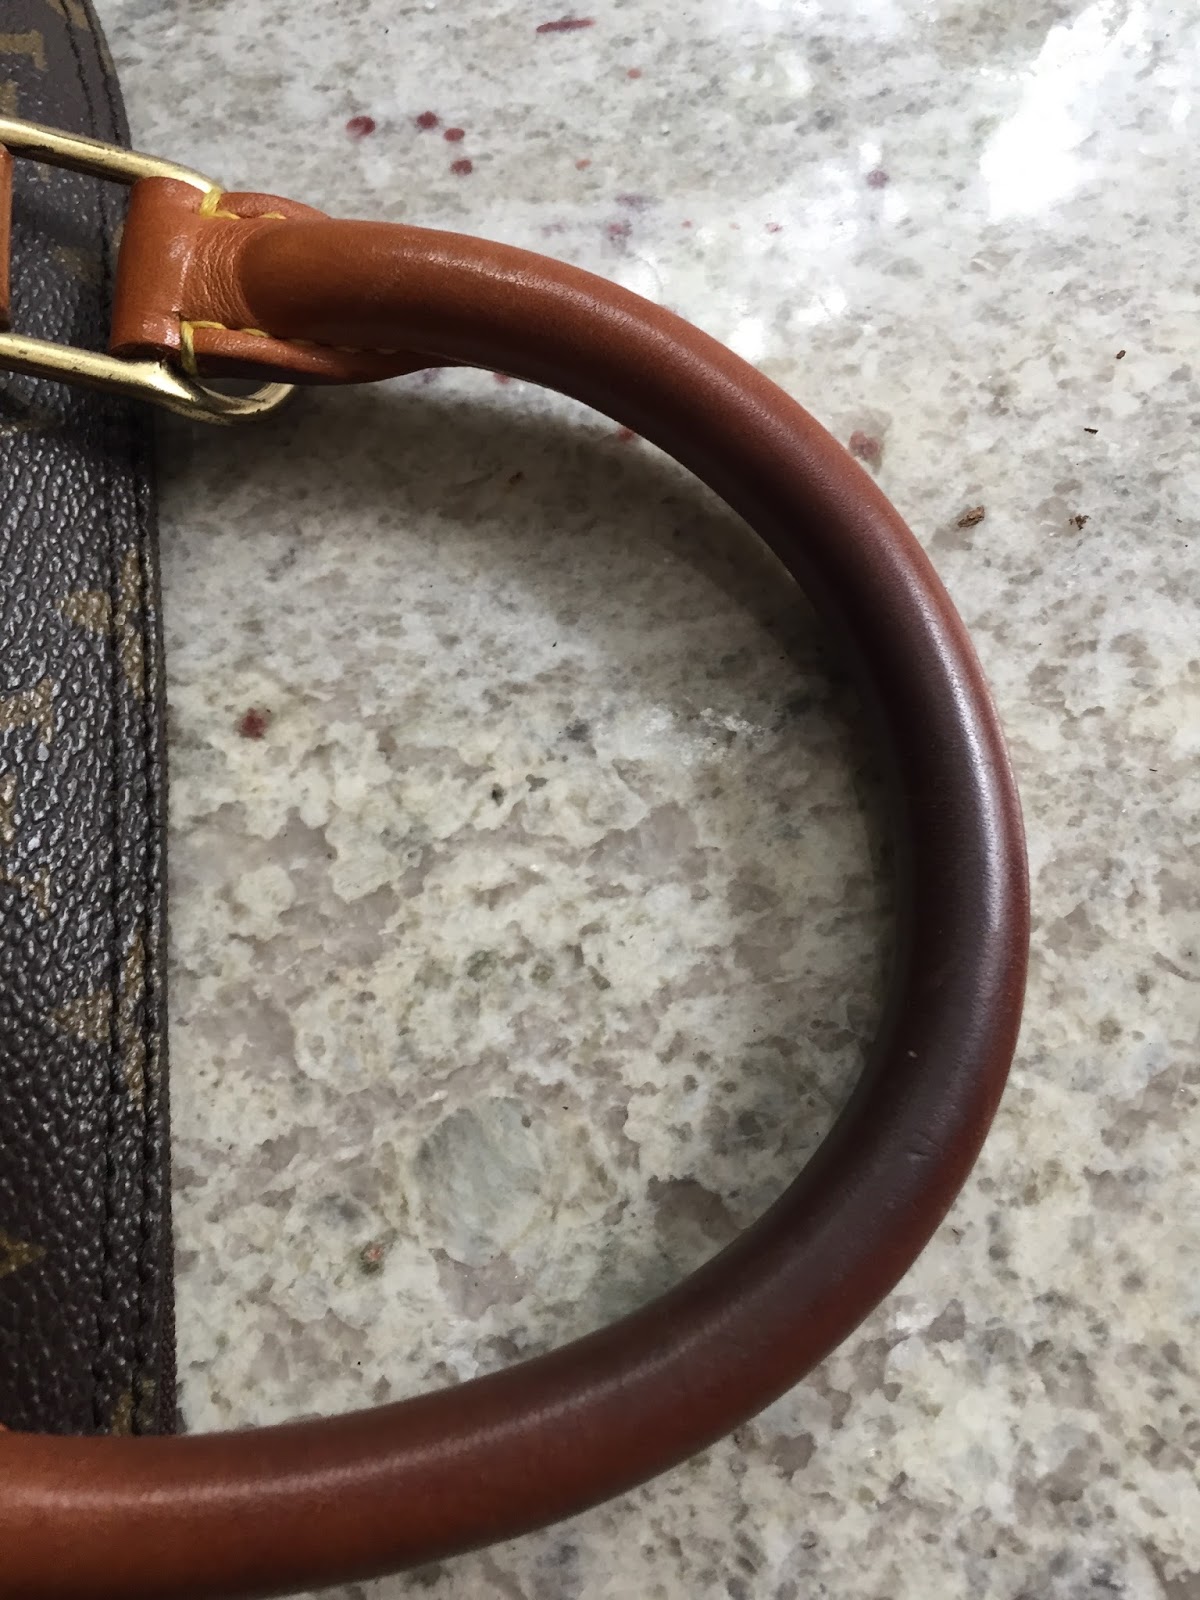 How to apply Leather Conditioner to Louis Vuitton Vachetta Leather